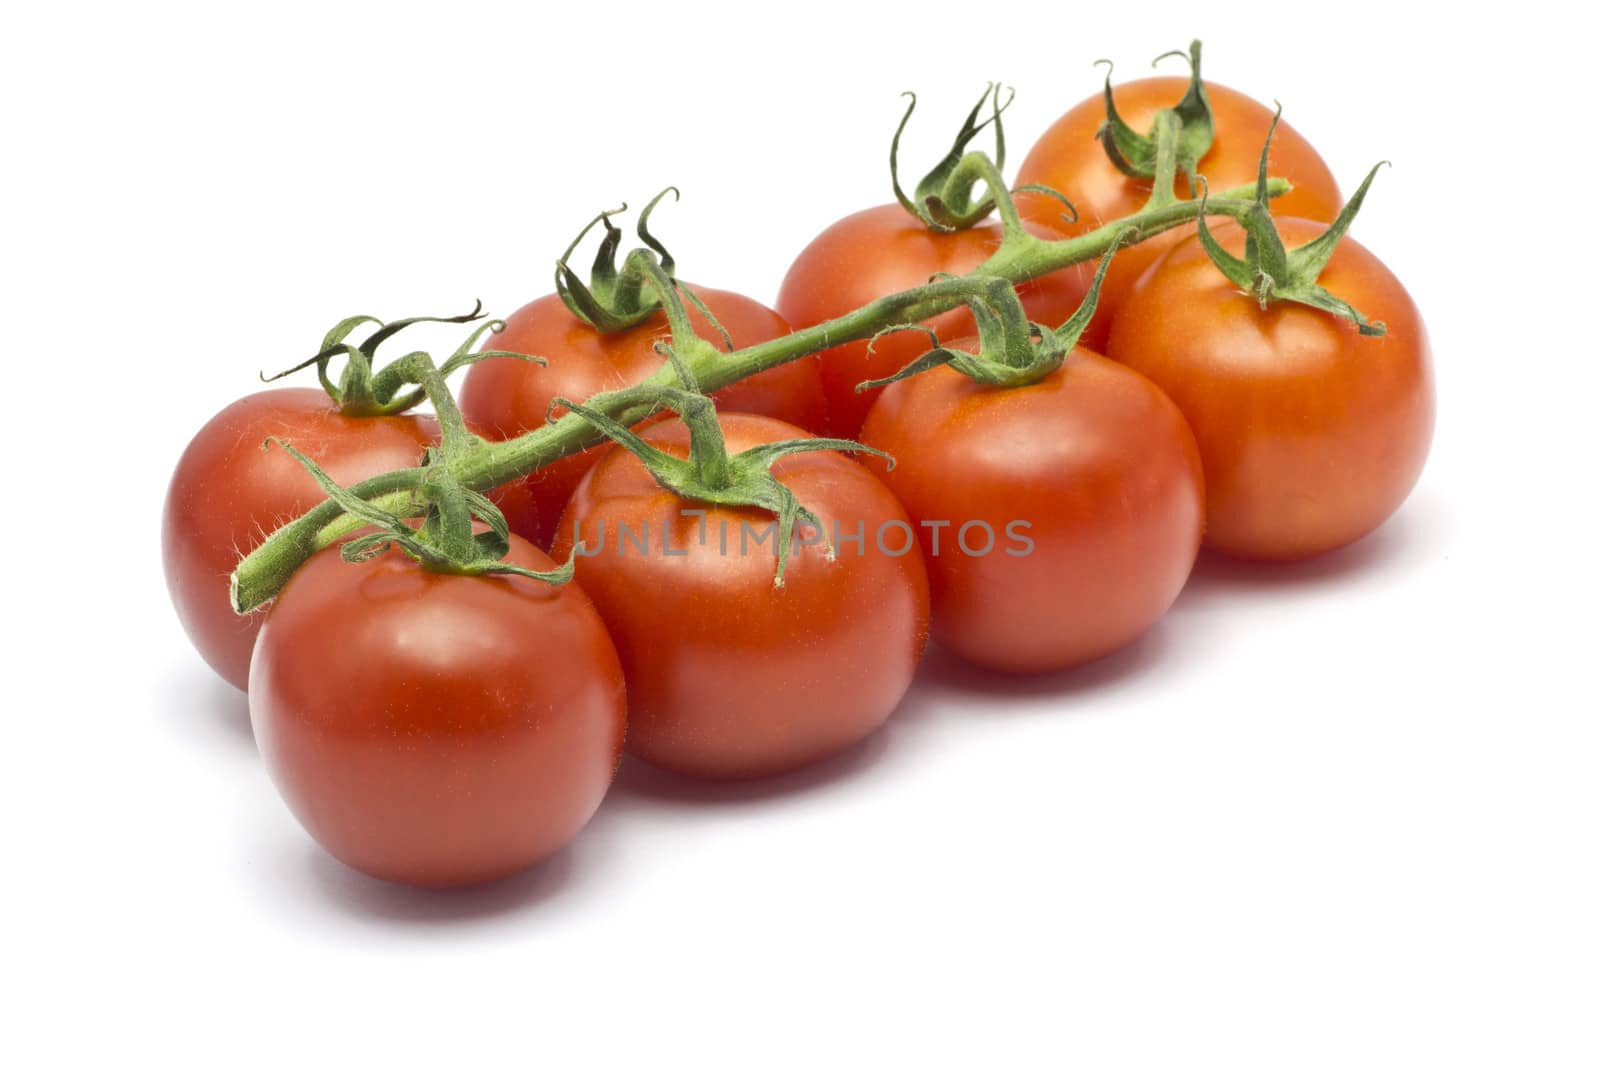 Eight cherry tomatoes on a white background.
Still attatched to the green twig